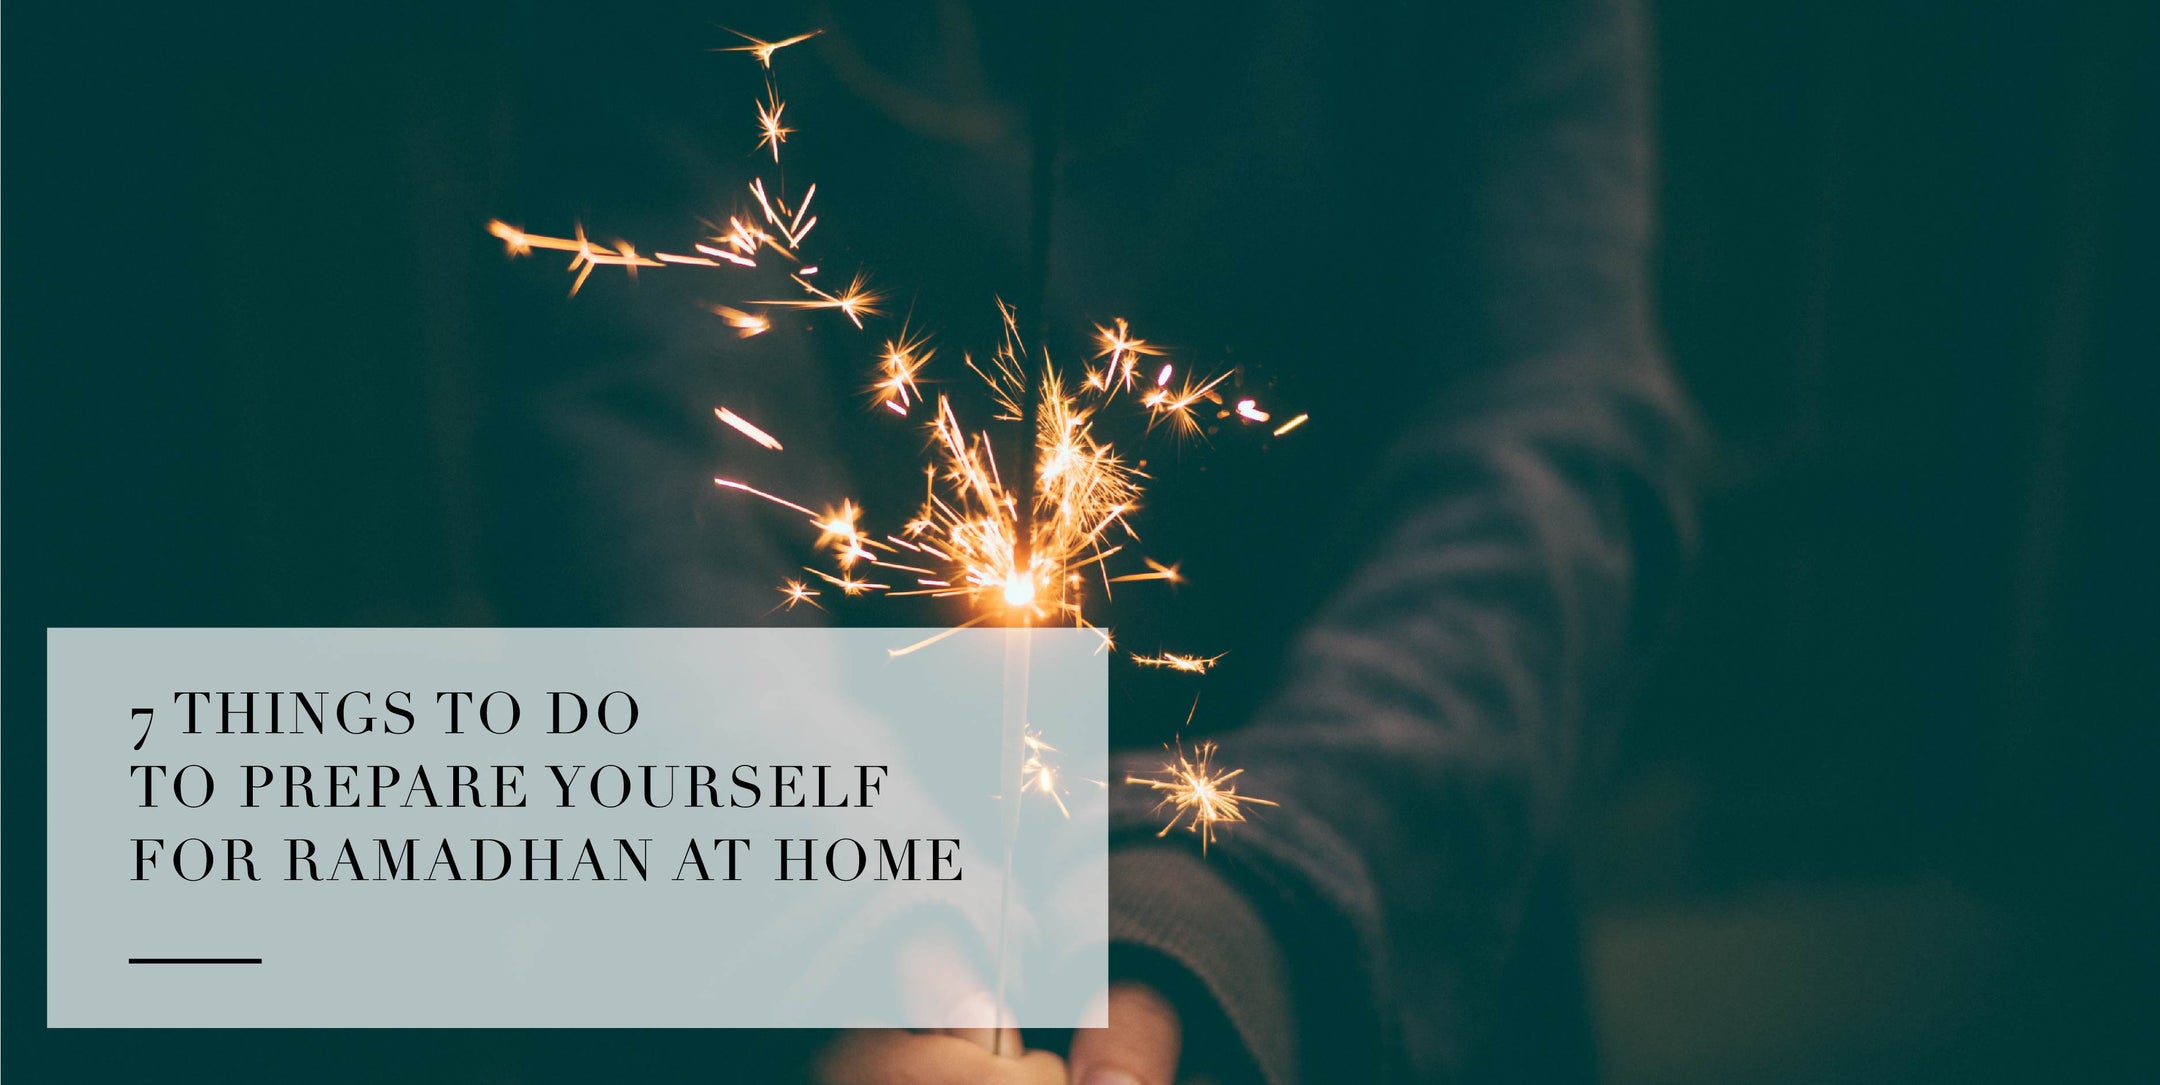 7 things to do to prepare yourself for Ramadhan at home